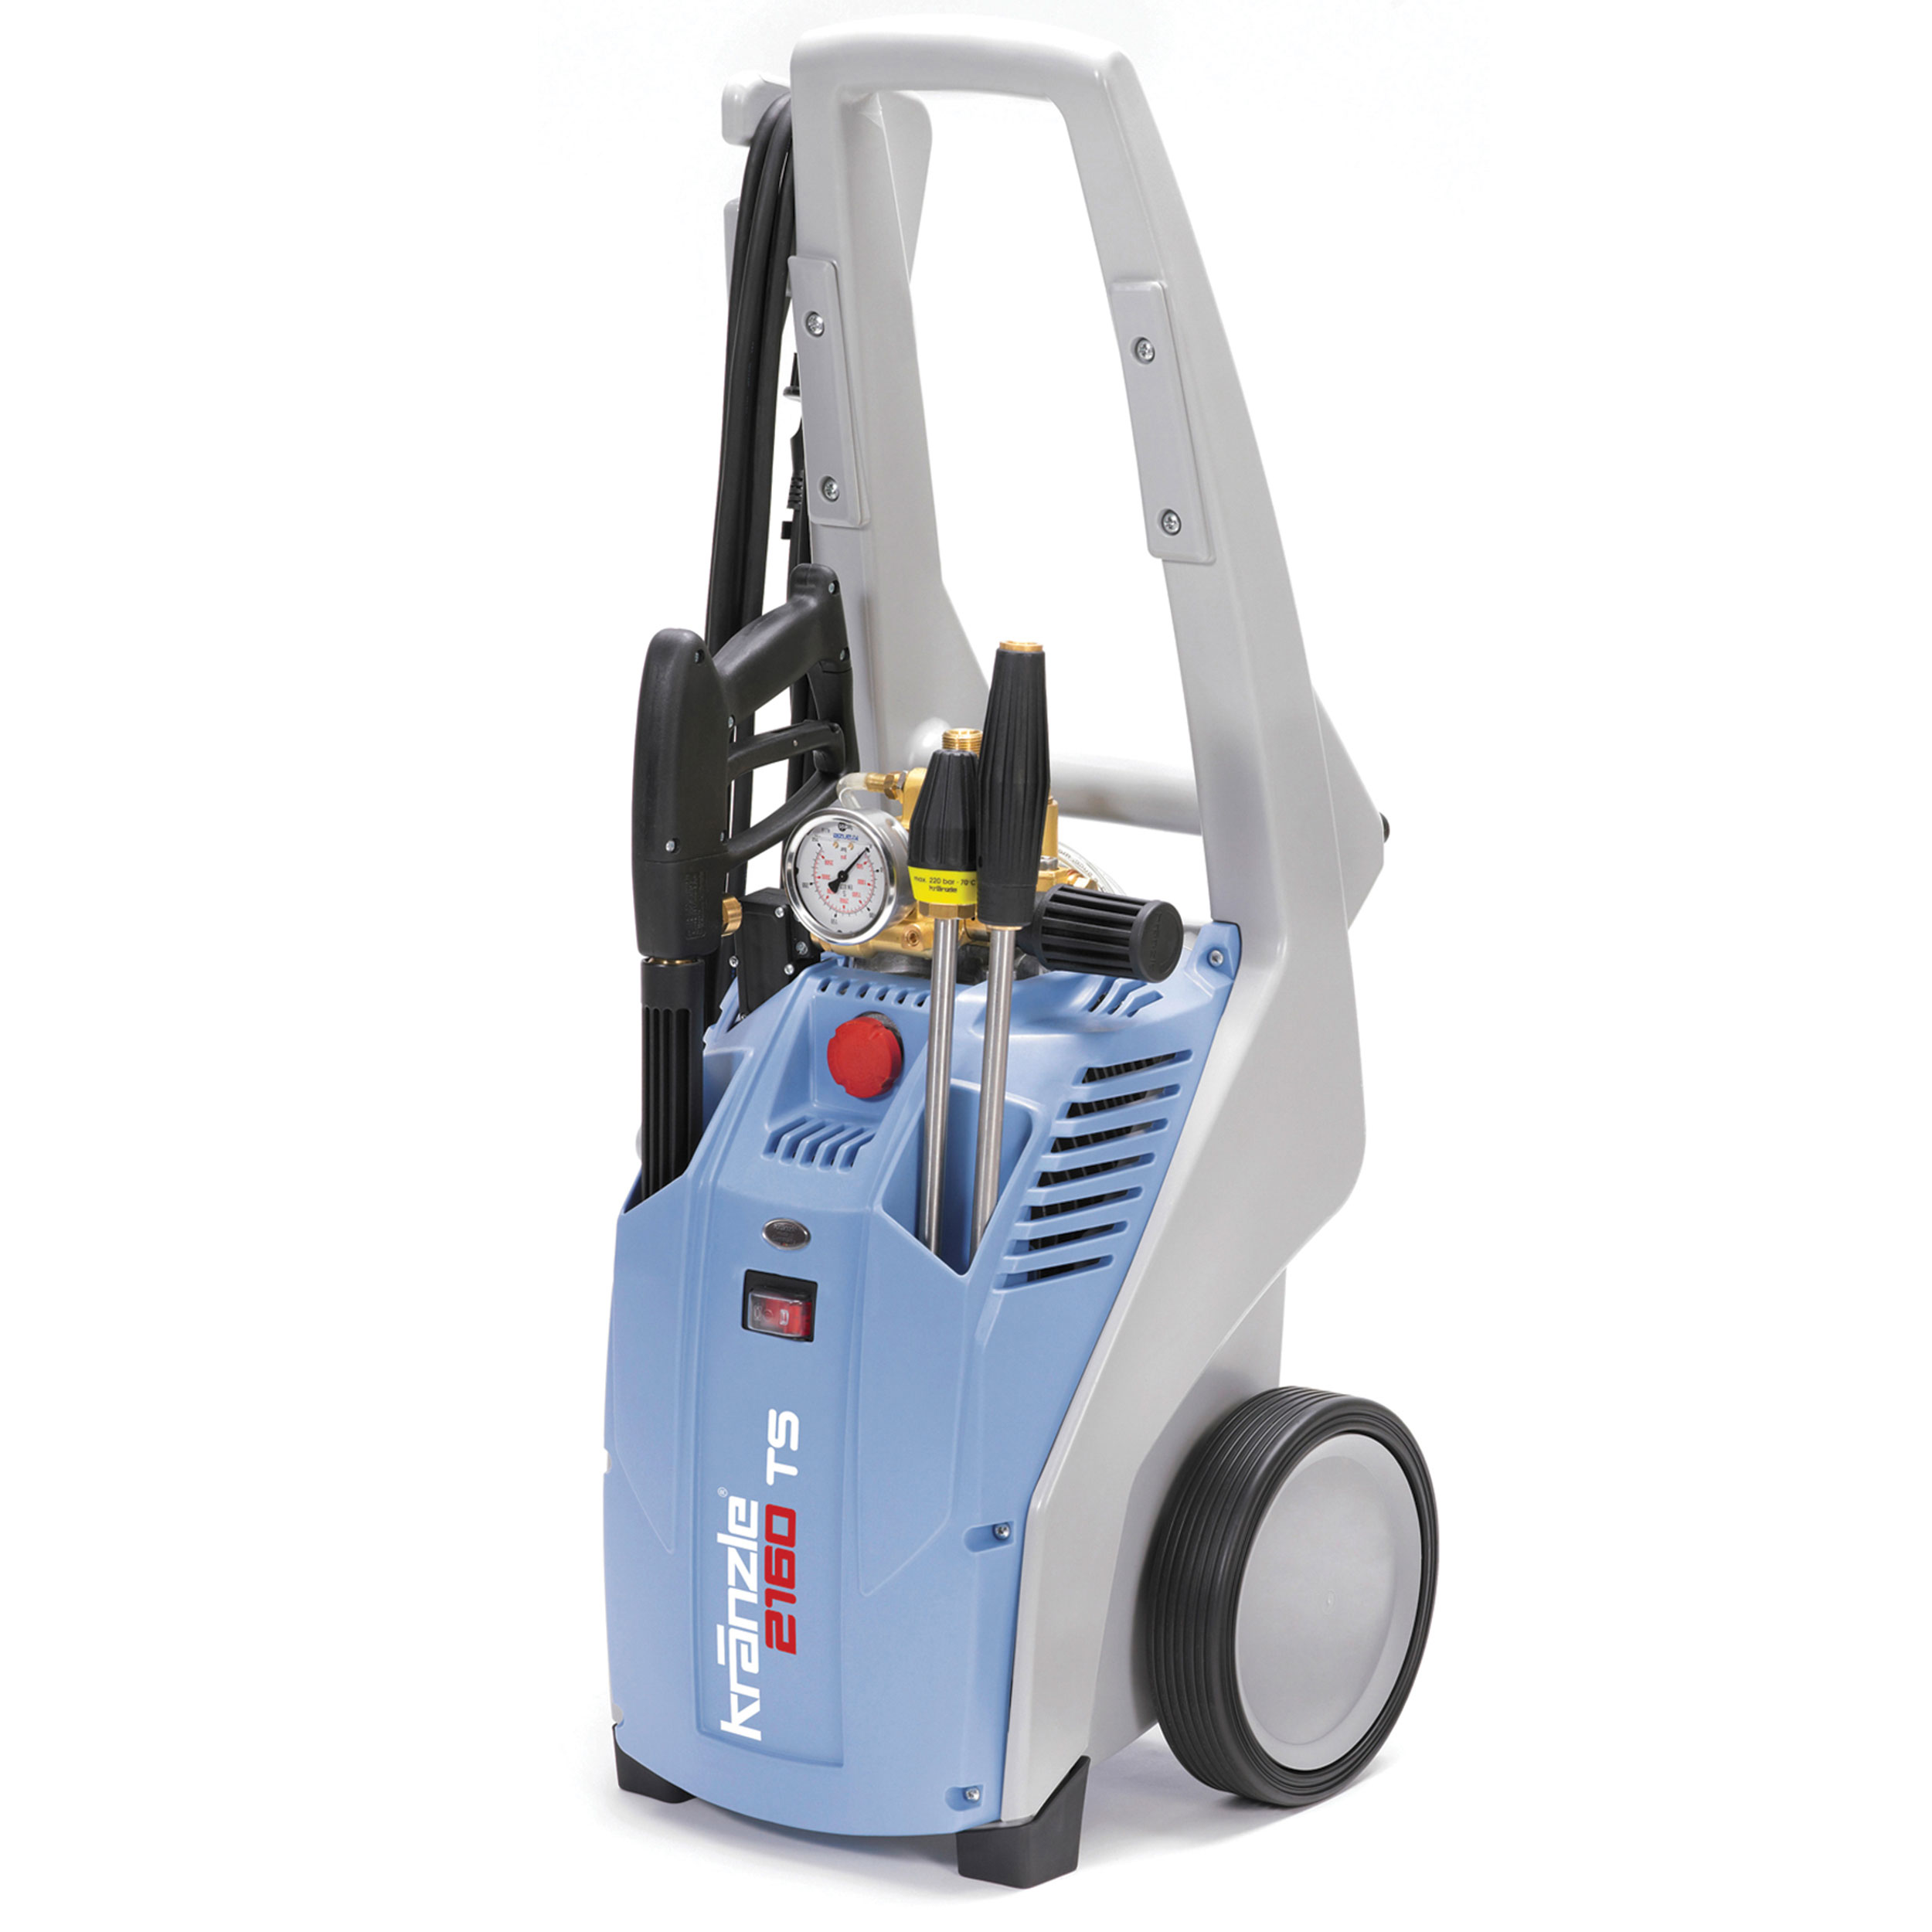 K2020 Pressure Washer, Cold Water, 110v, 20a, No Gfi